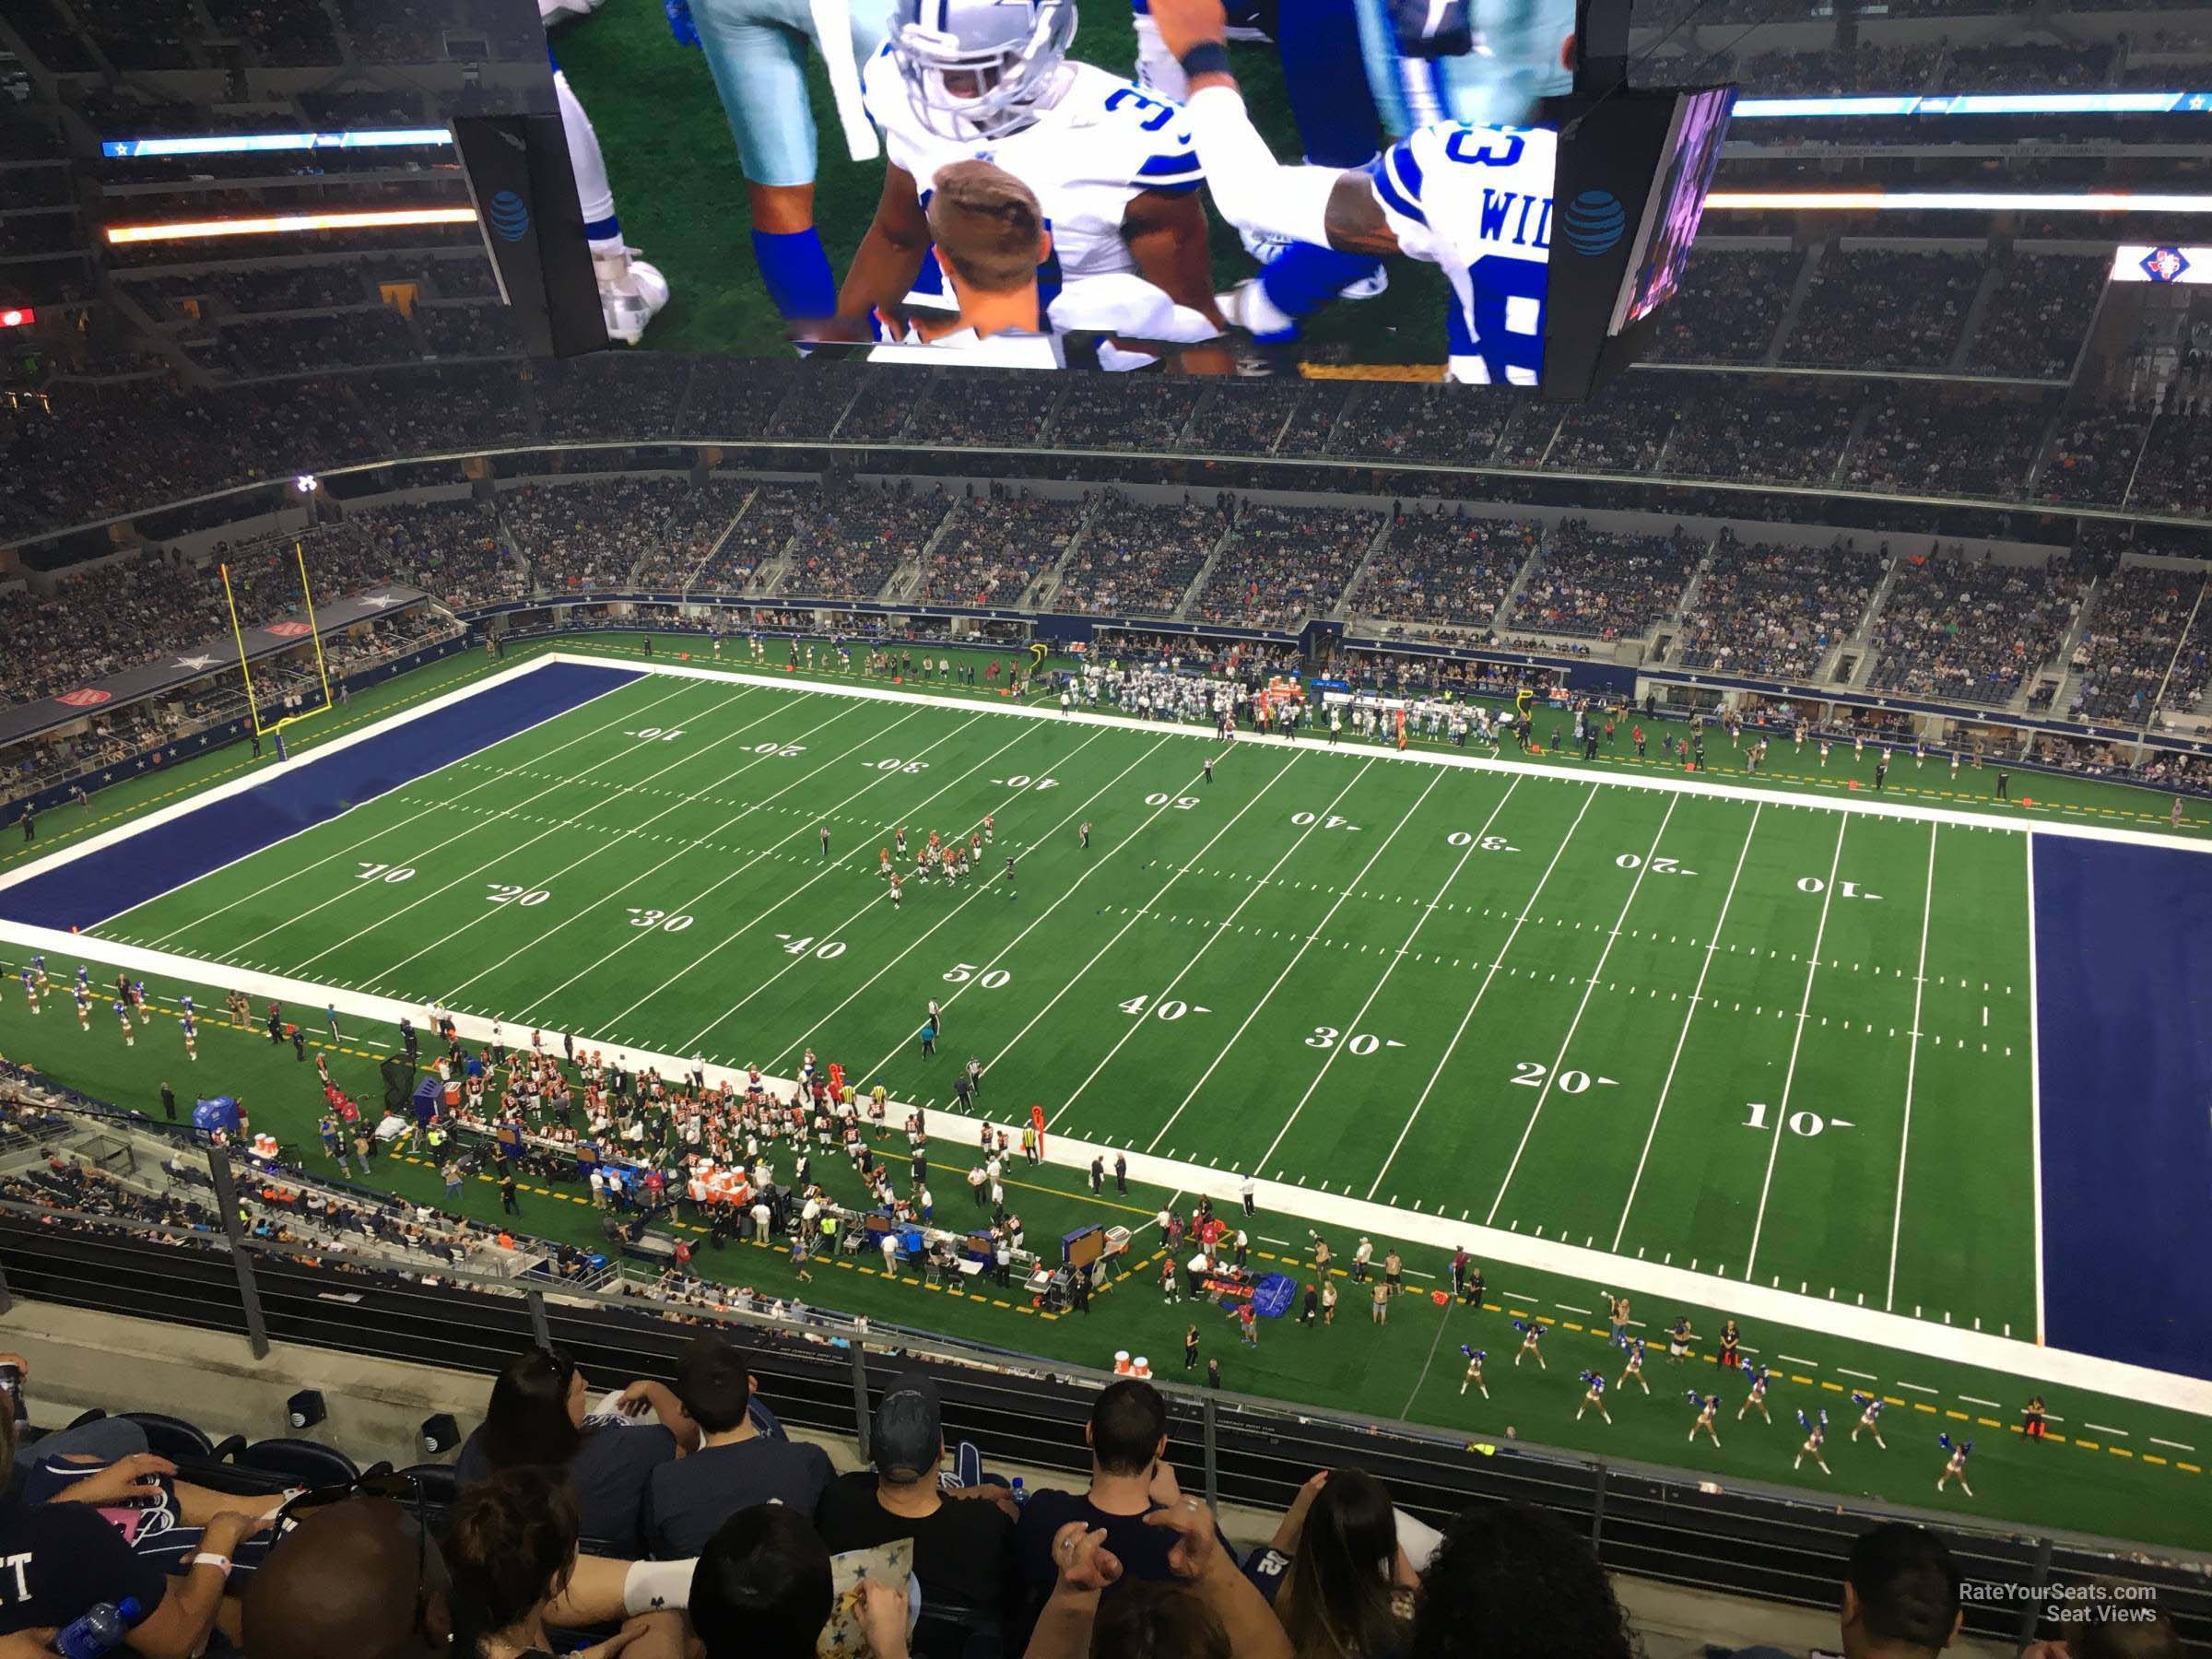 section 440, row 22 seat view  for football - at&t stadium (cowboys stadium)